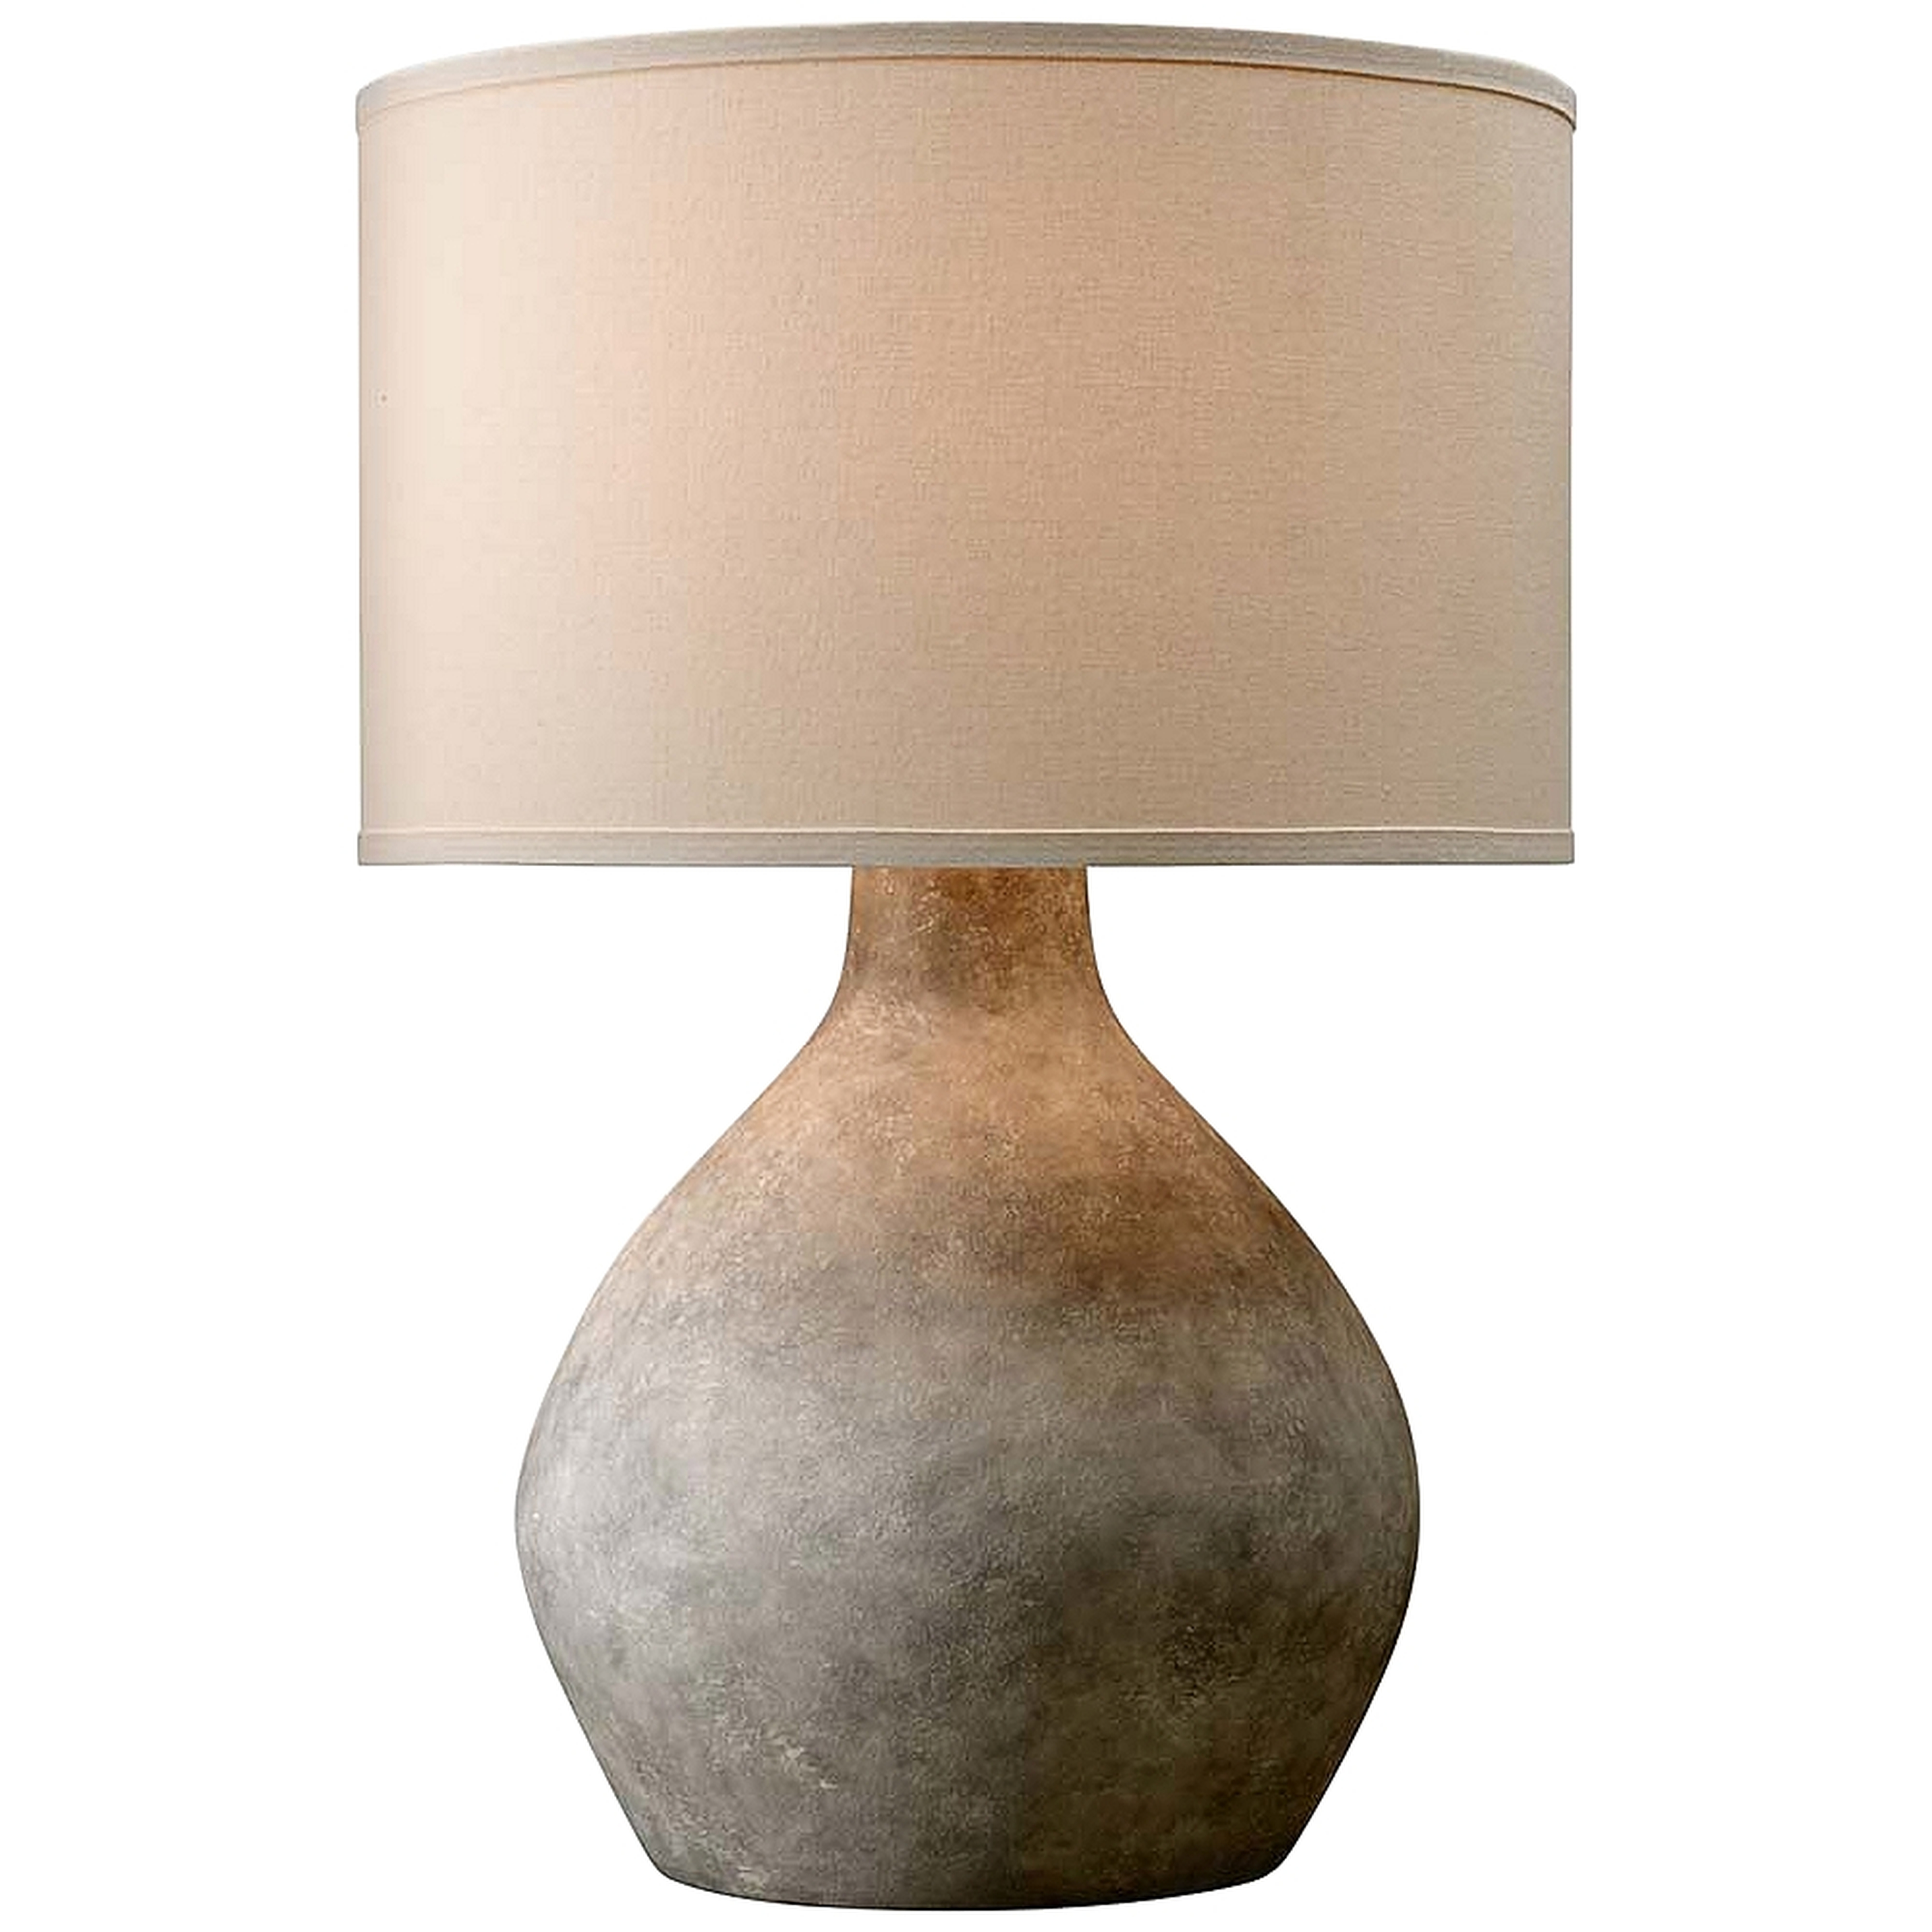 STETSON TABLE LAMP - McGee & Co.